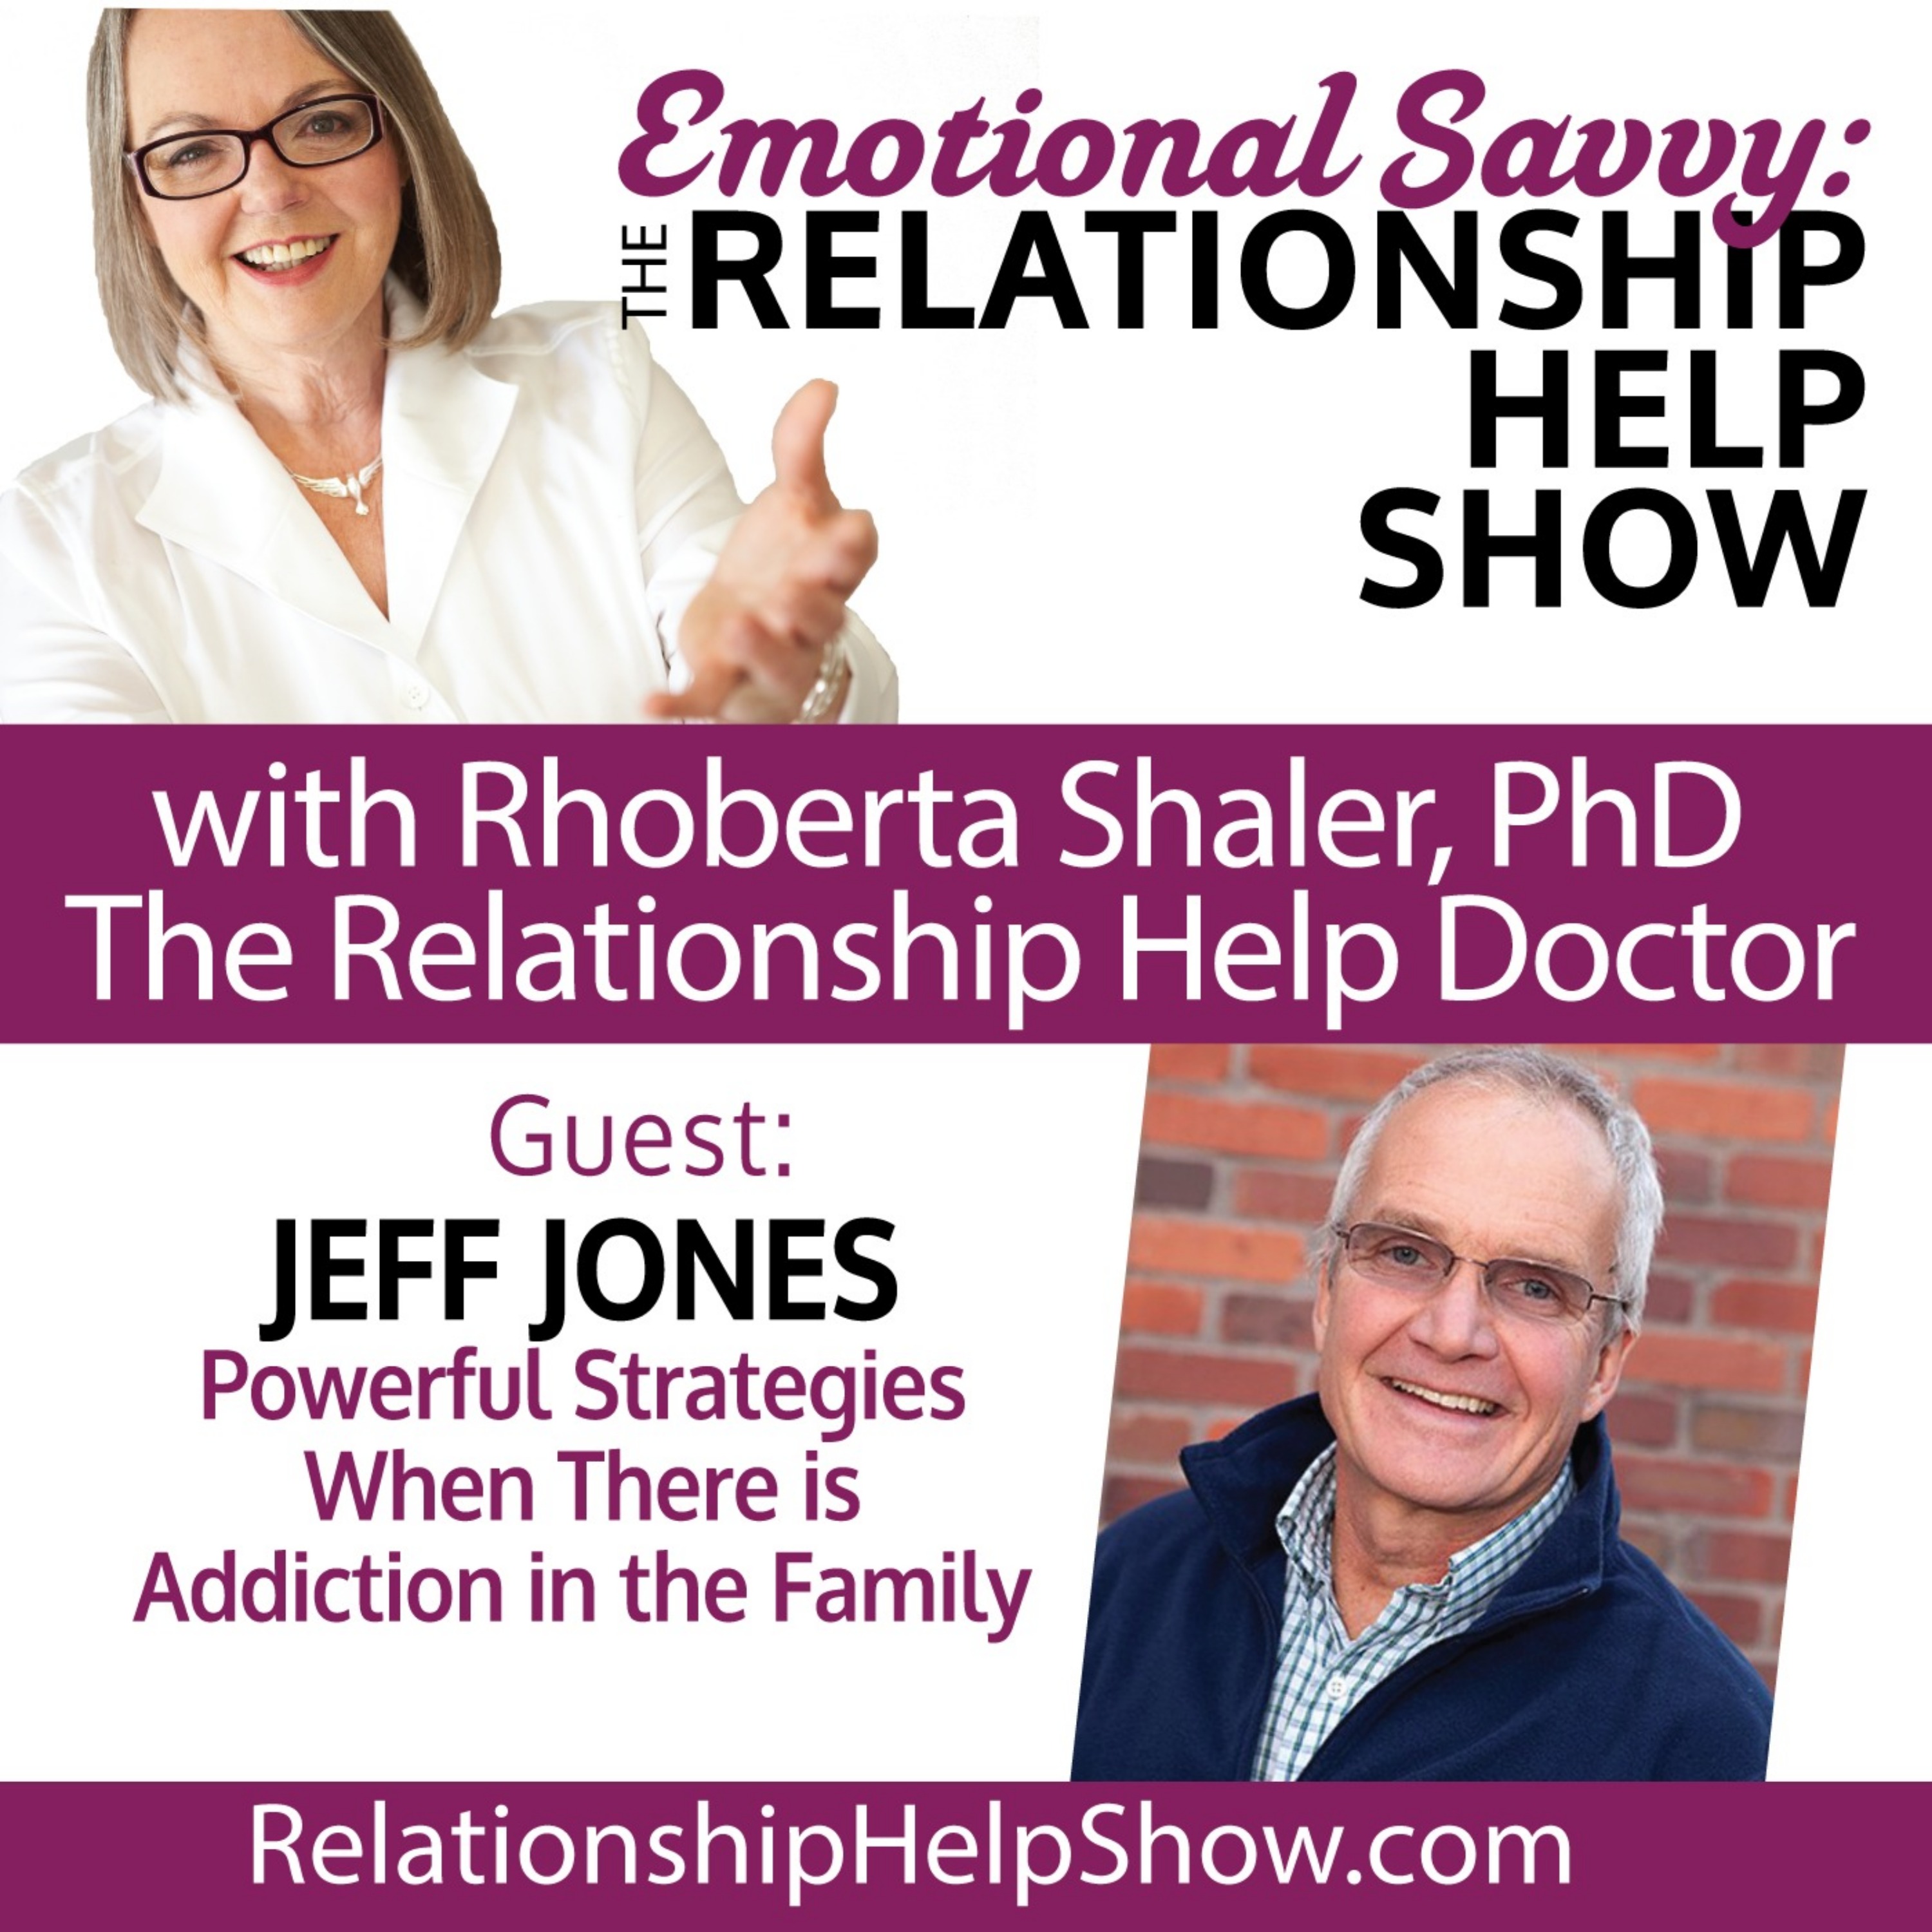 What About Toxic Shame? Powerful Strategies to Help With Addiction in the Family  GUEST: Jeff Jones